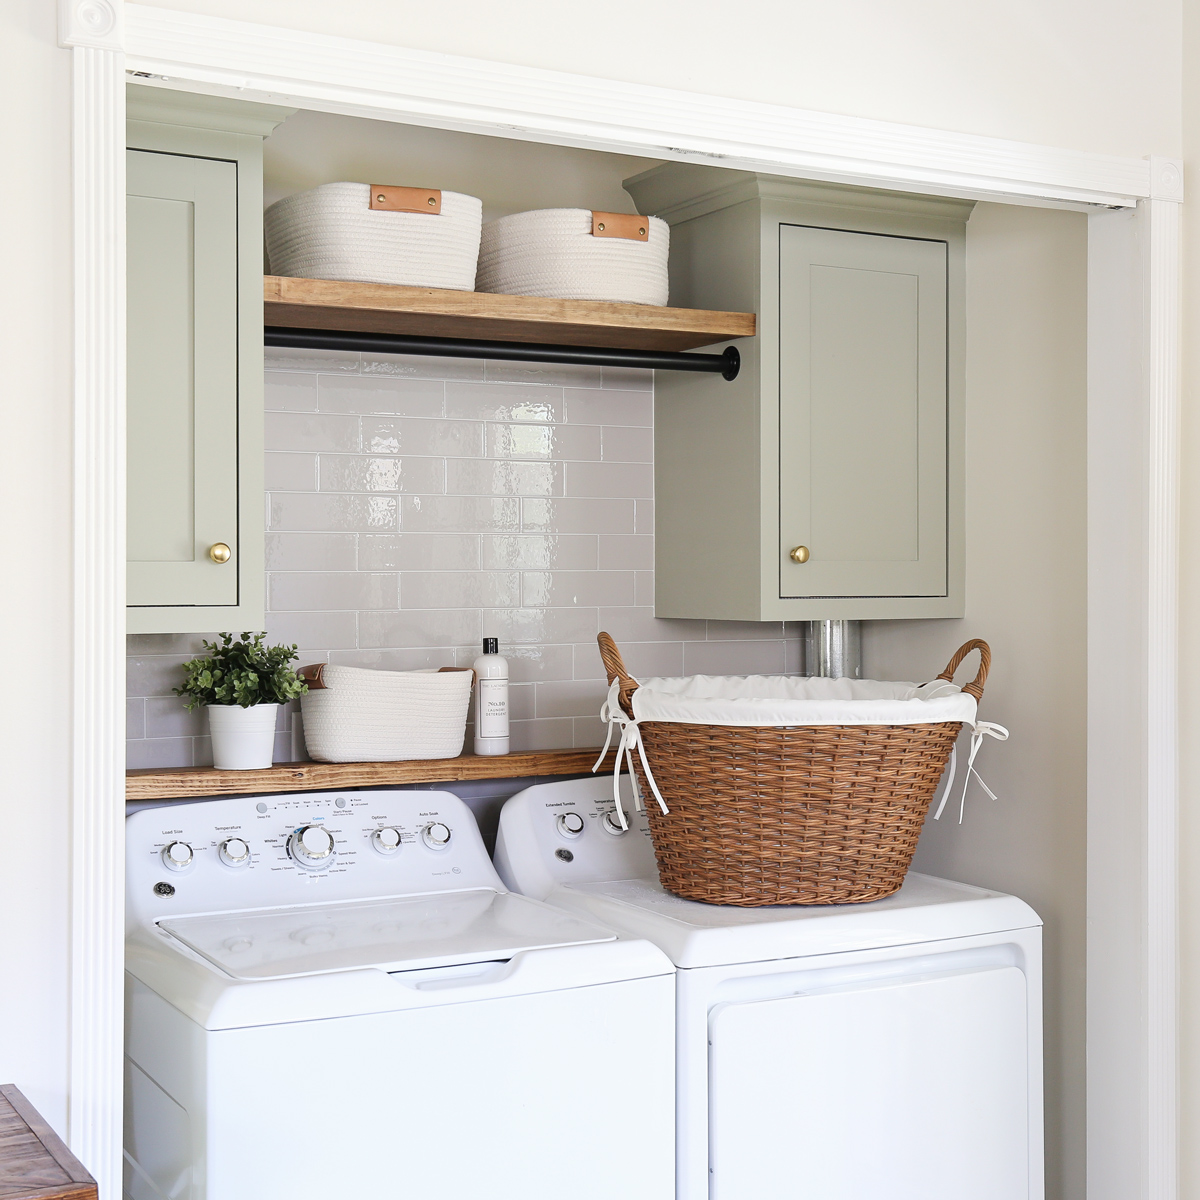 Small Space Laundry Makeover - From Drab to Fab! - TidyMom®